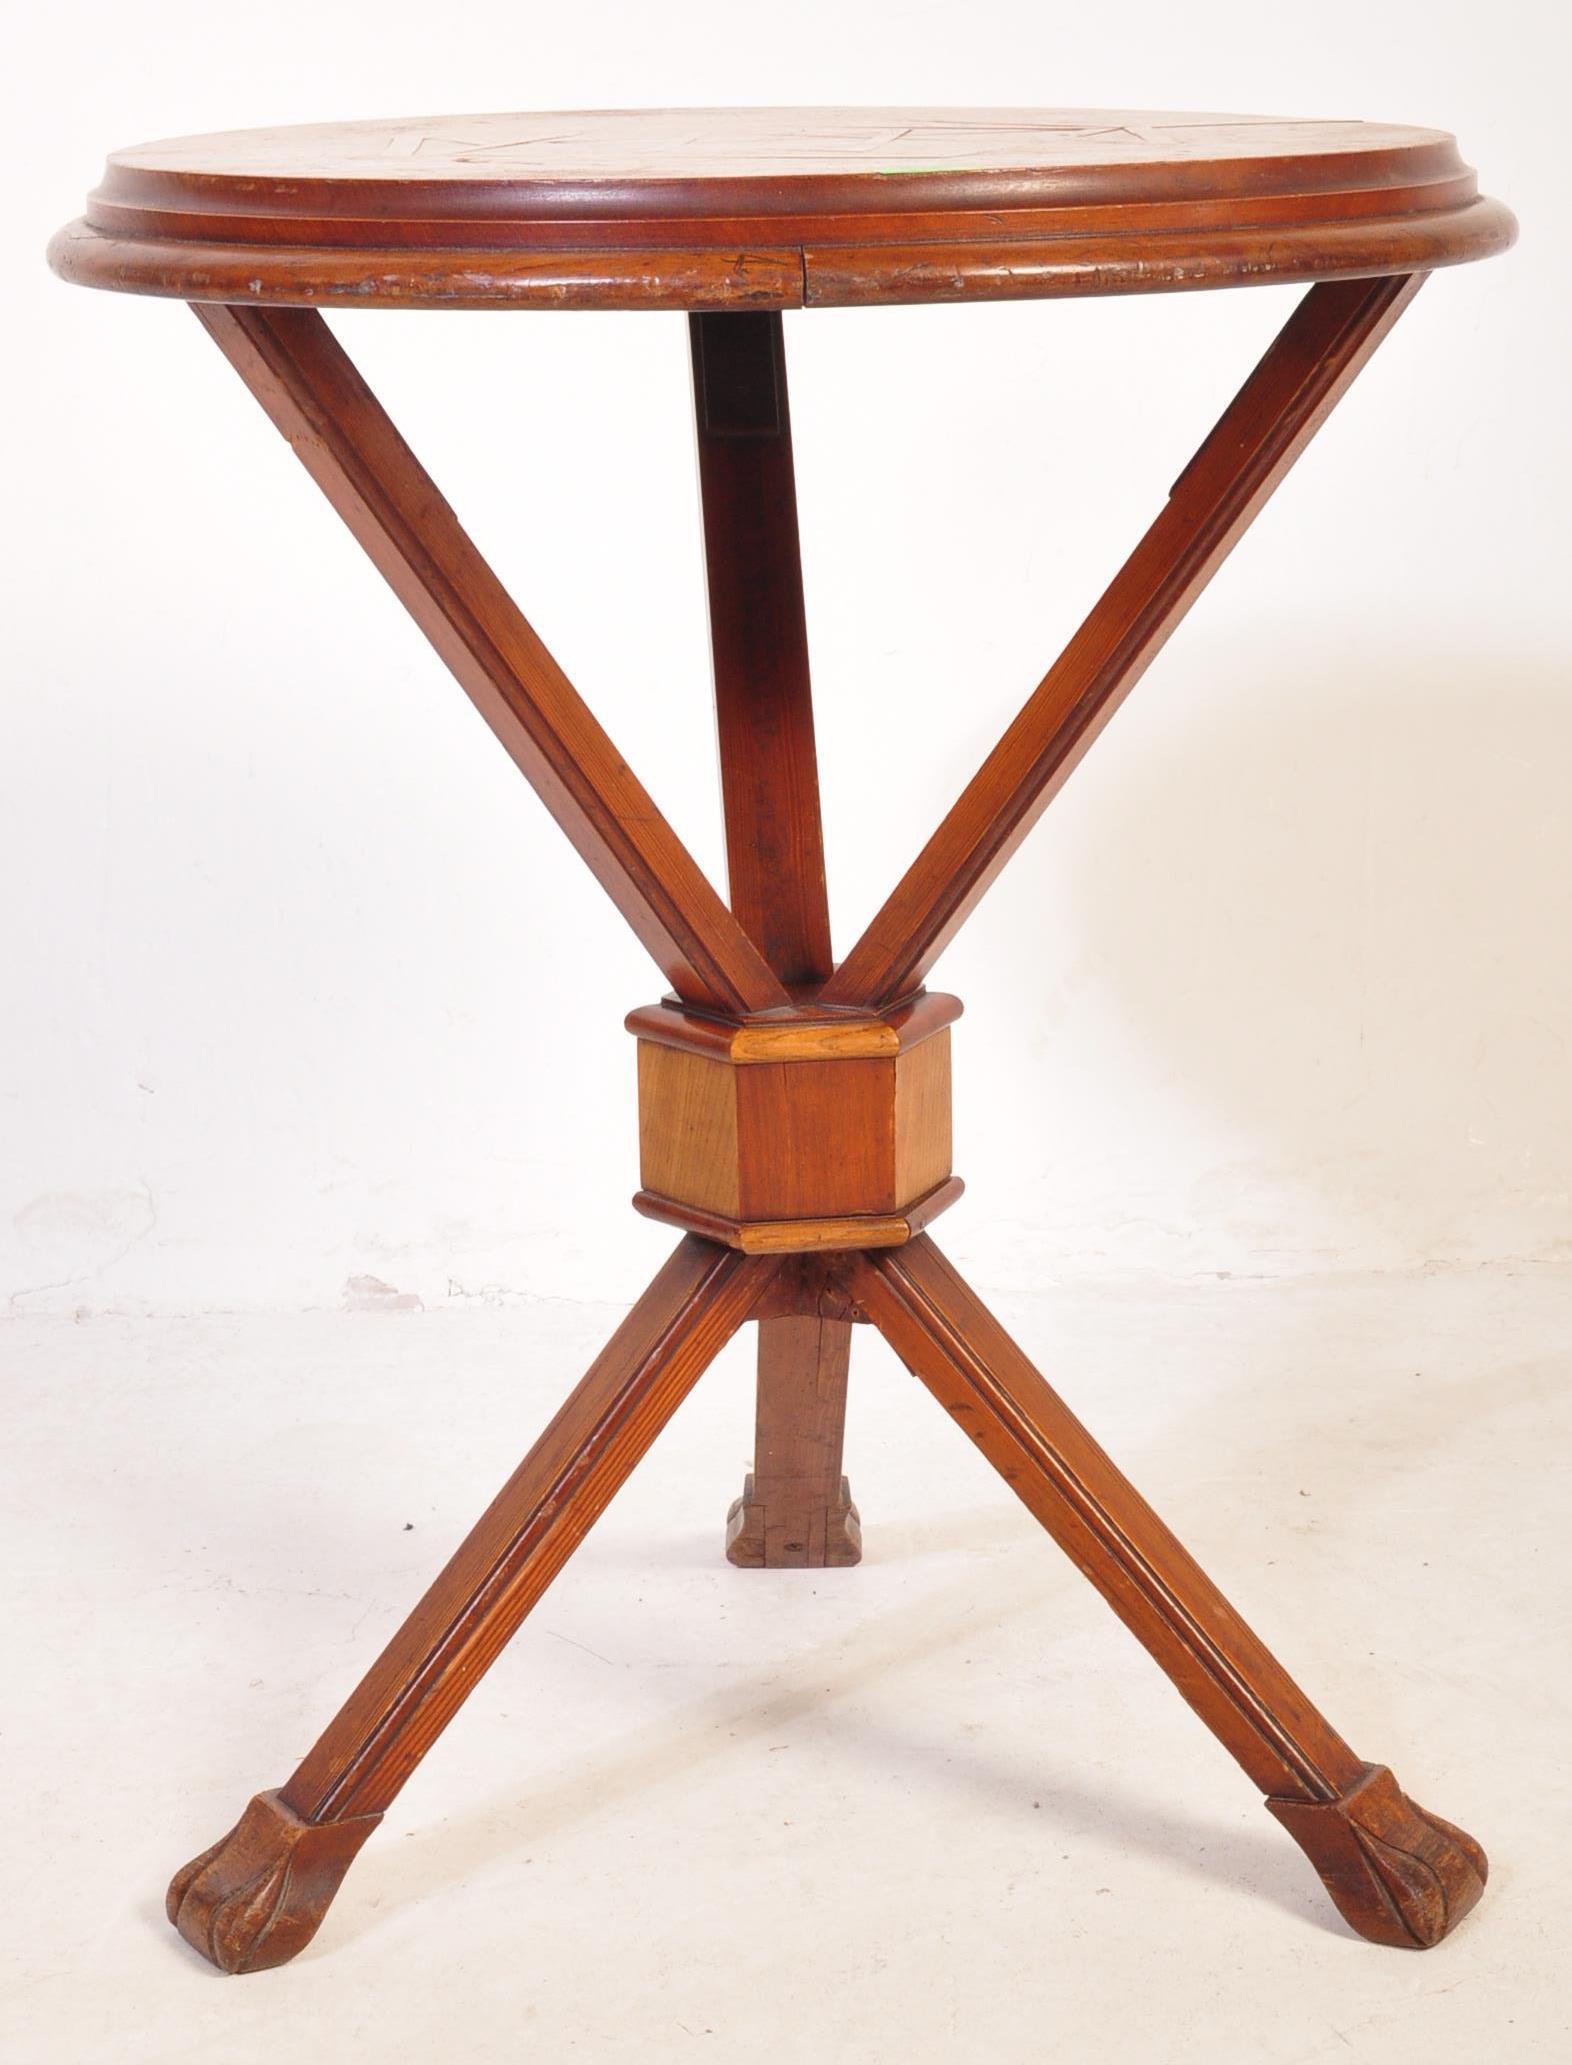 EARLY 20TH CENTURY CRICKET TABLE WITH INLAY